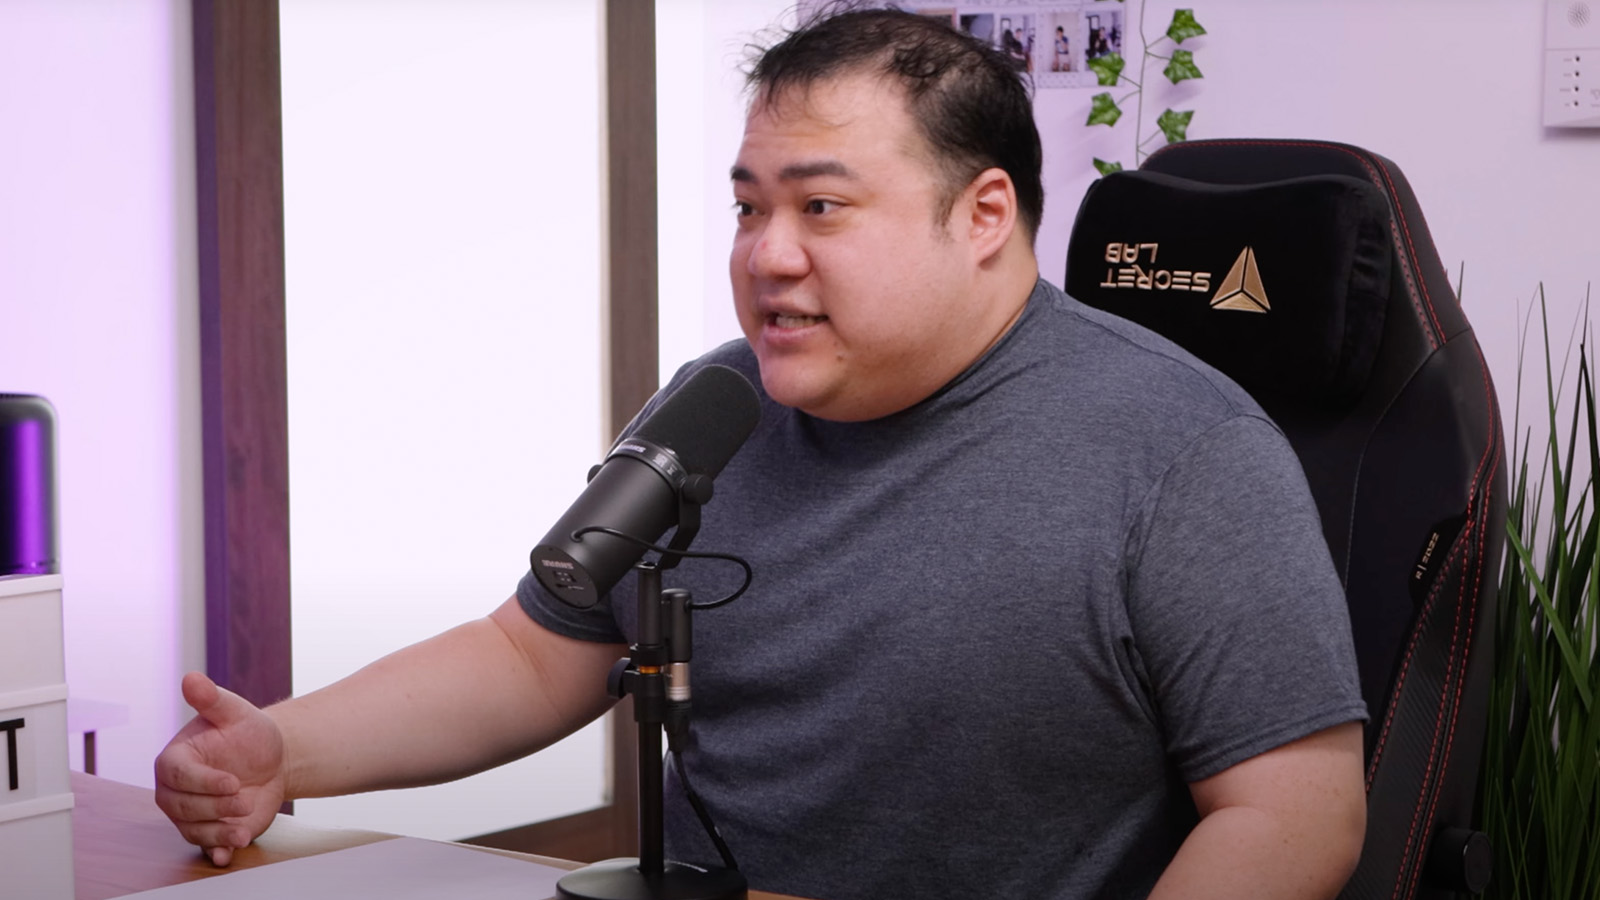 OfflineTVs Scarra hints three streamer boxing events could happen in 2023 